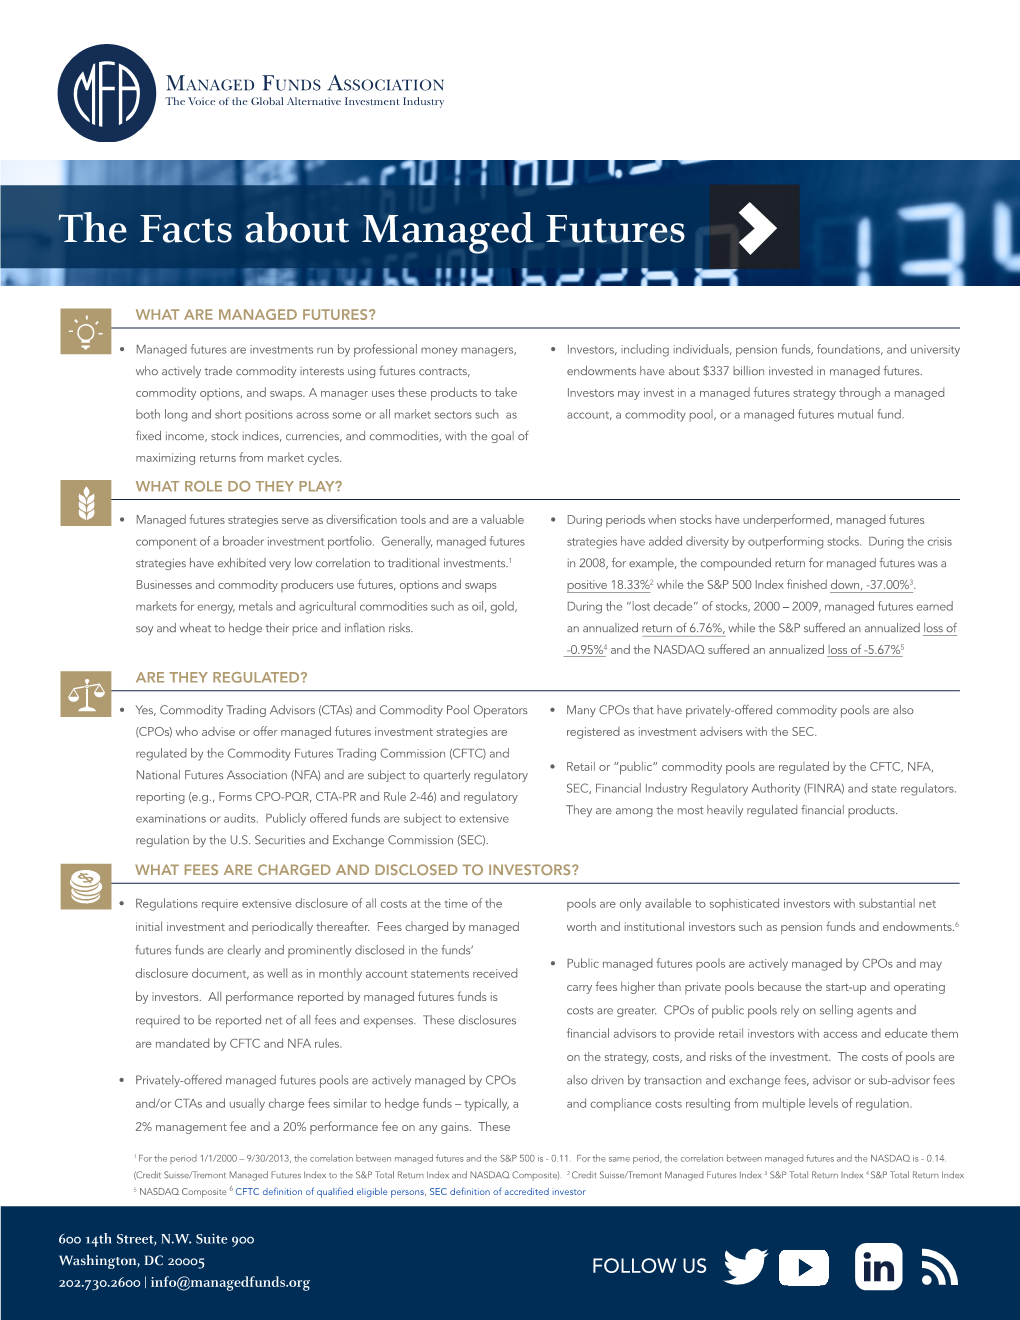 The Facts About Managed Futures